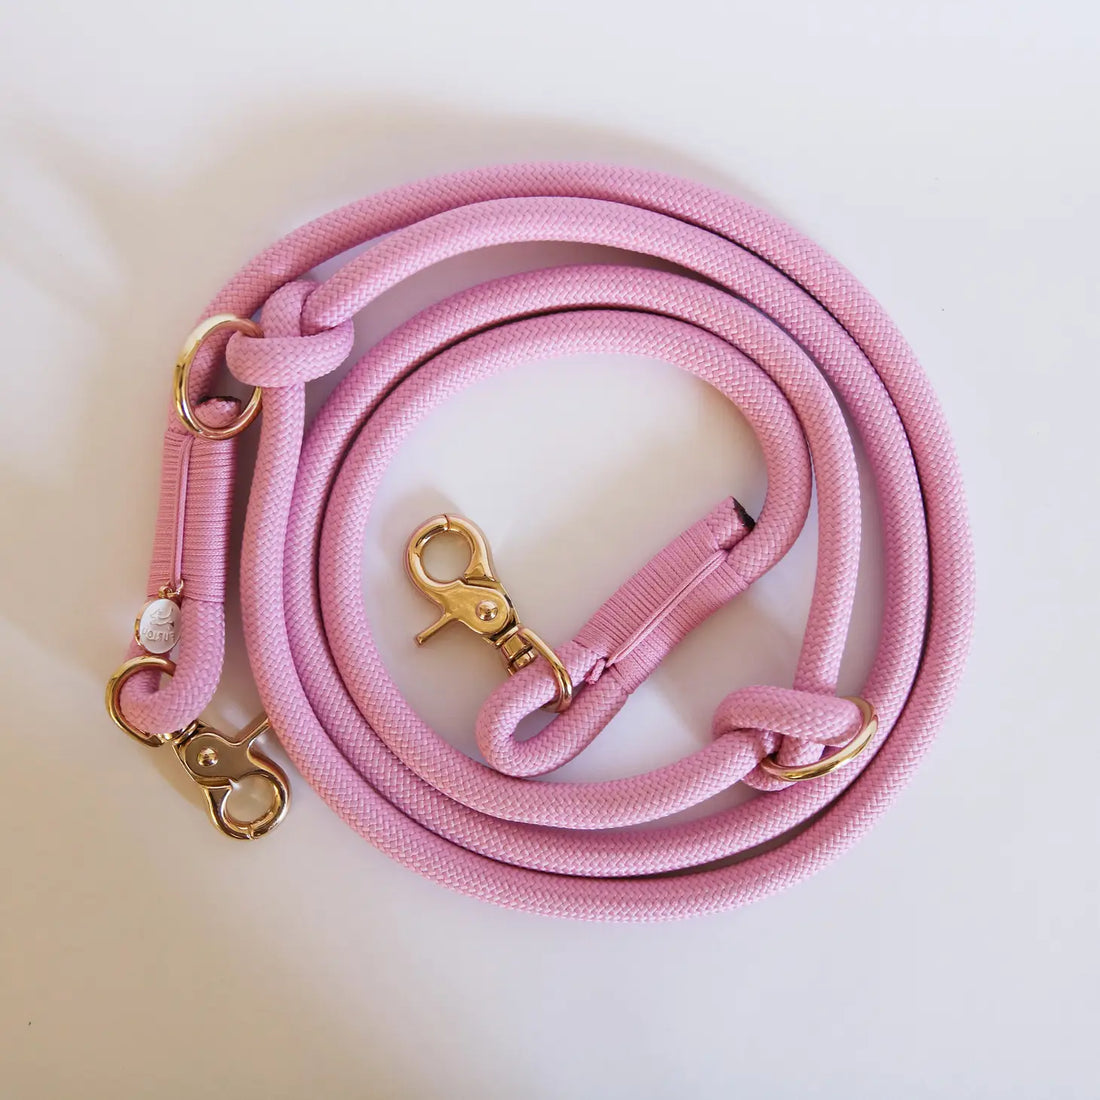 Hands Free Braided Rope Leash - Baby Pink